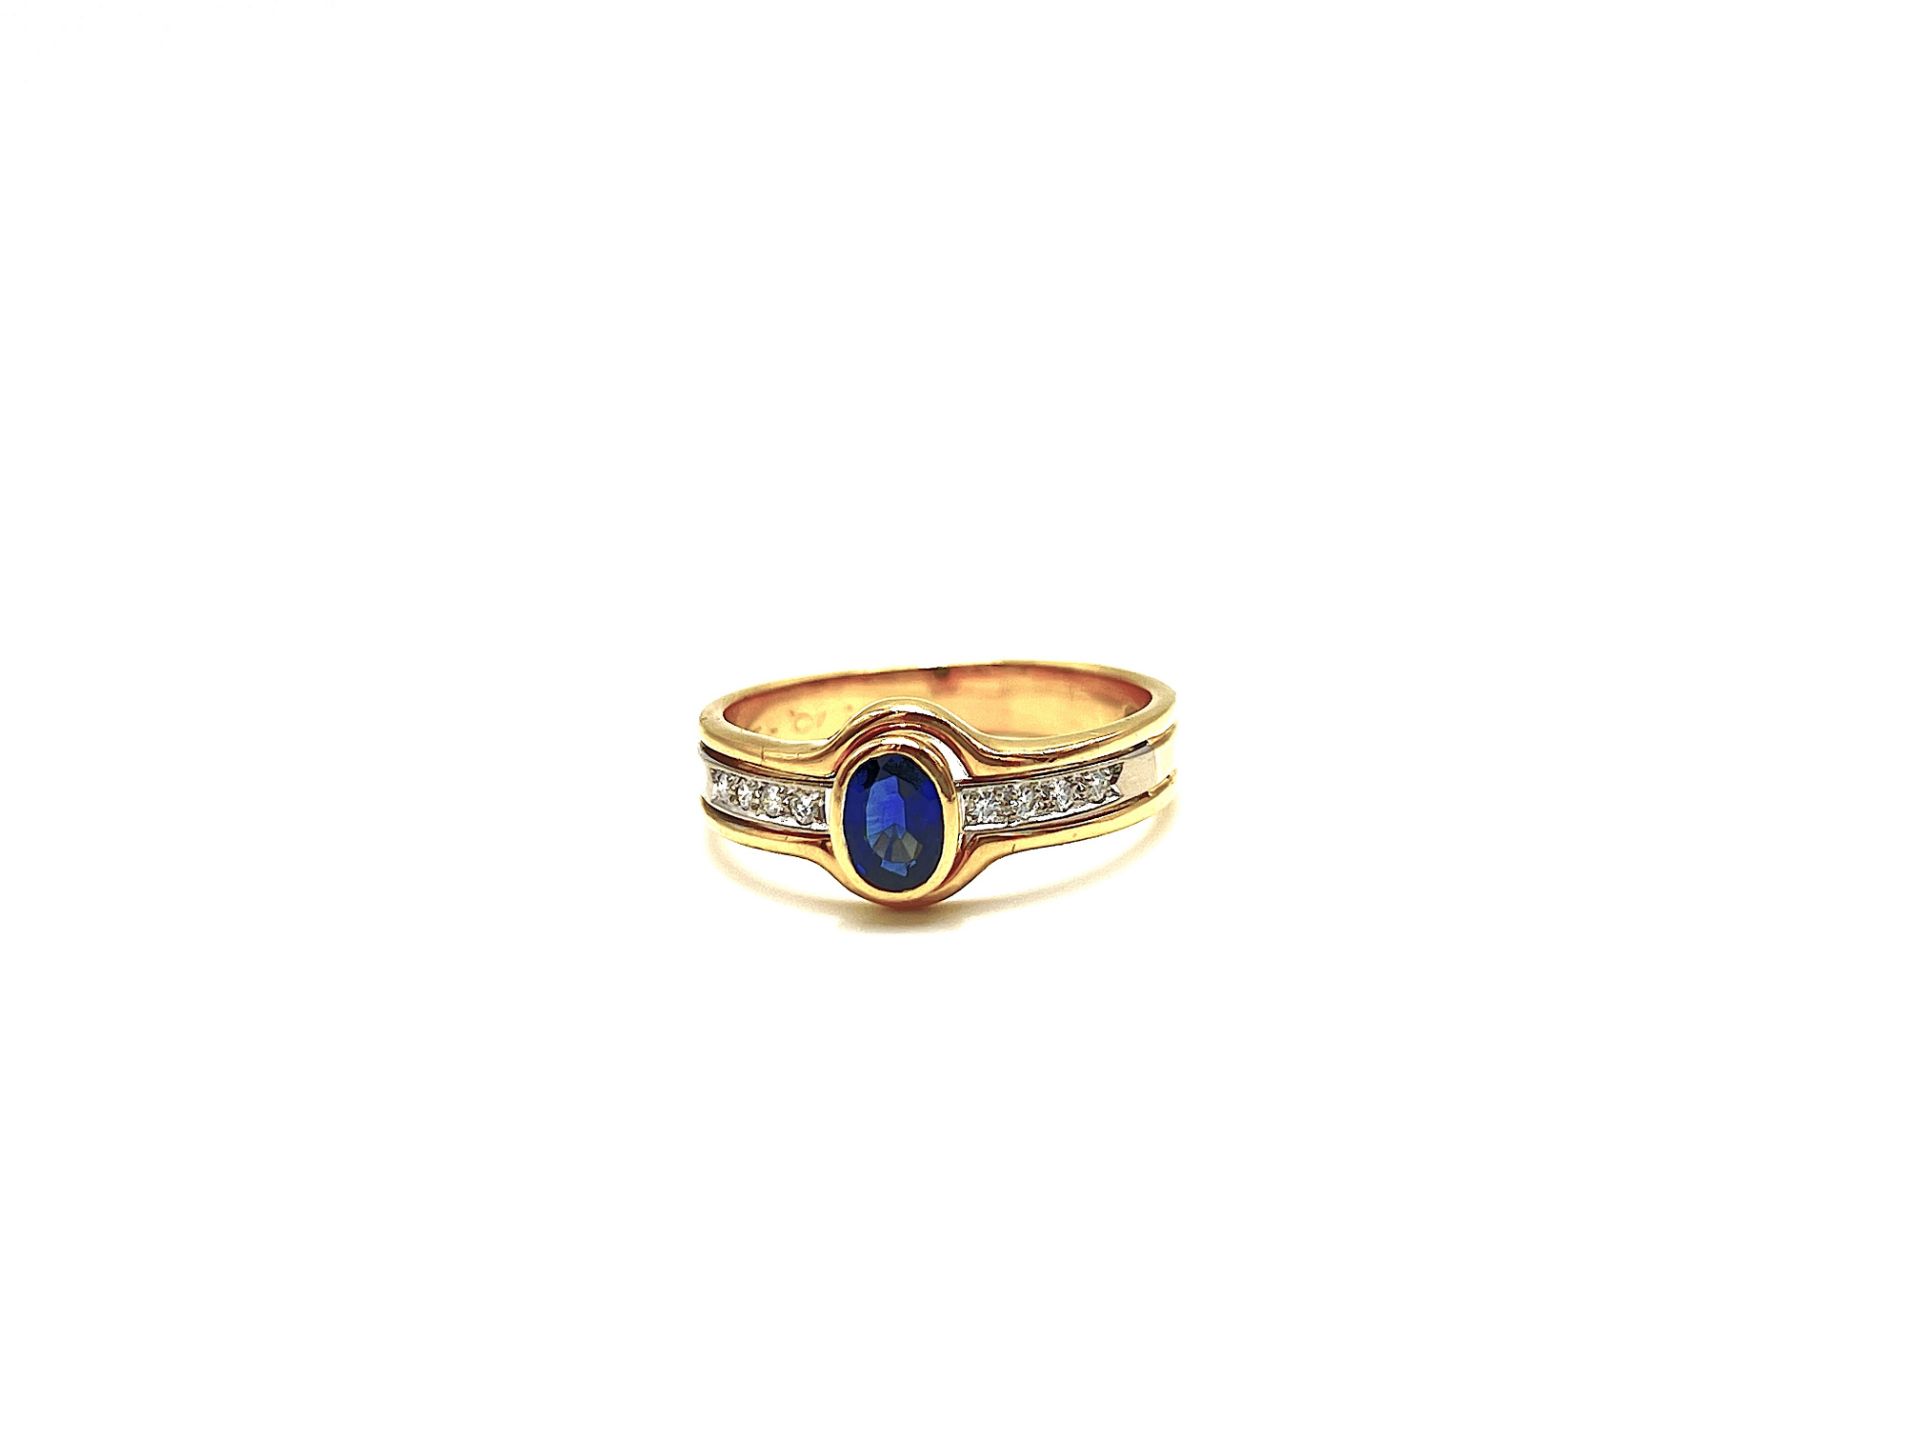 Sapphire ring with brillant-cut diamonds - Image 8 of 8